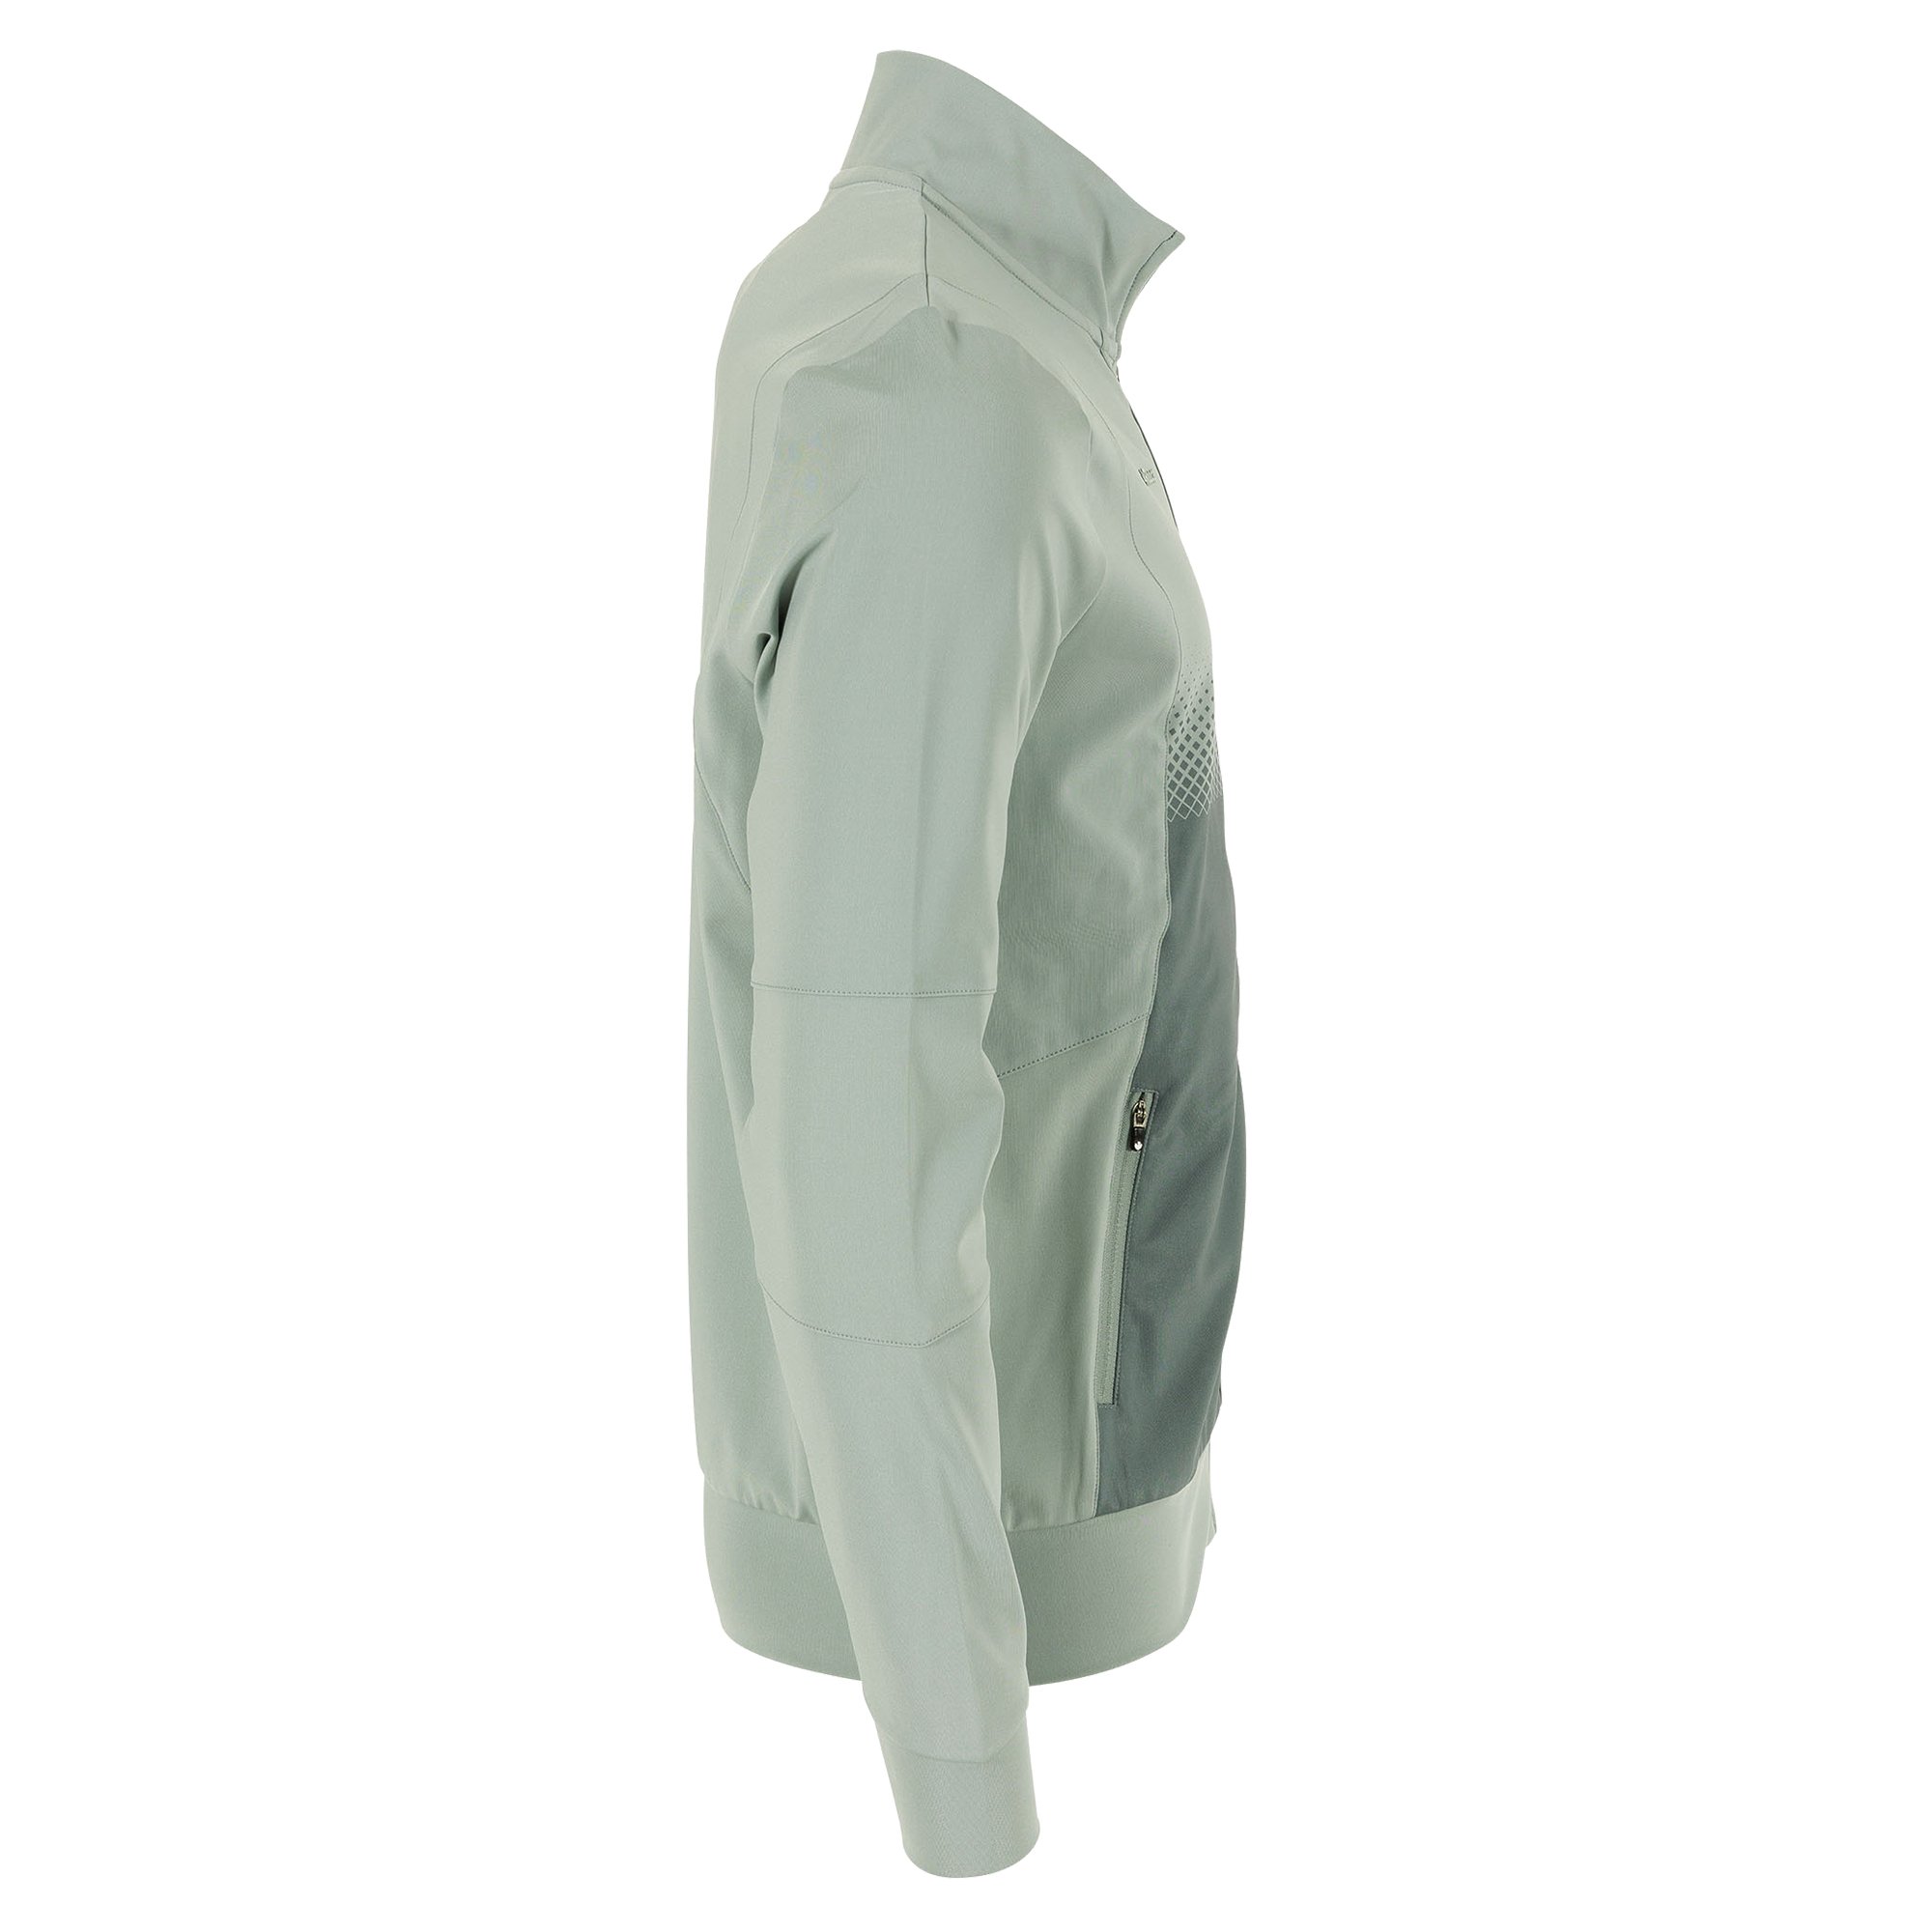 Reece Australia Cleve Stretched Fit Jacket Full Zip